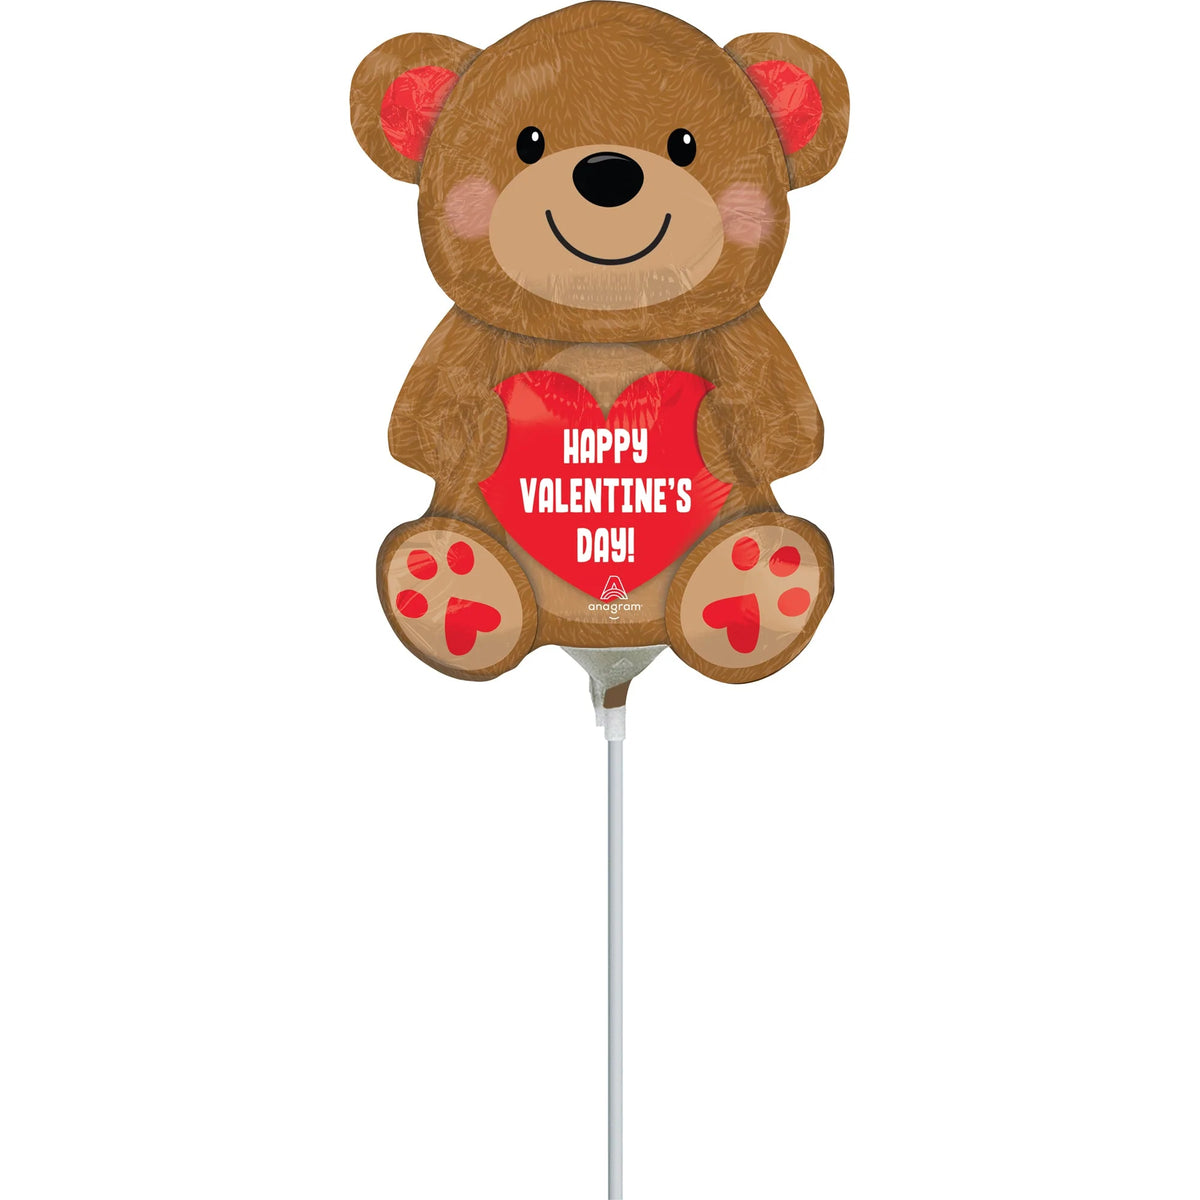 LE GROUPE BLC INTL INC Balloons Air Filled "Happy Valentine's Day!" Cuddly Brown Bear Foil Balloon, 14 Inches, 1 Count